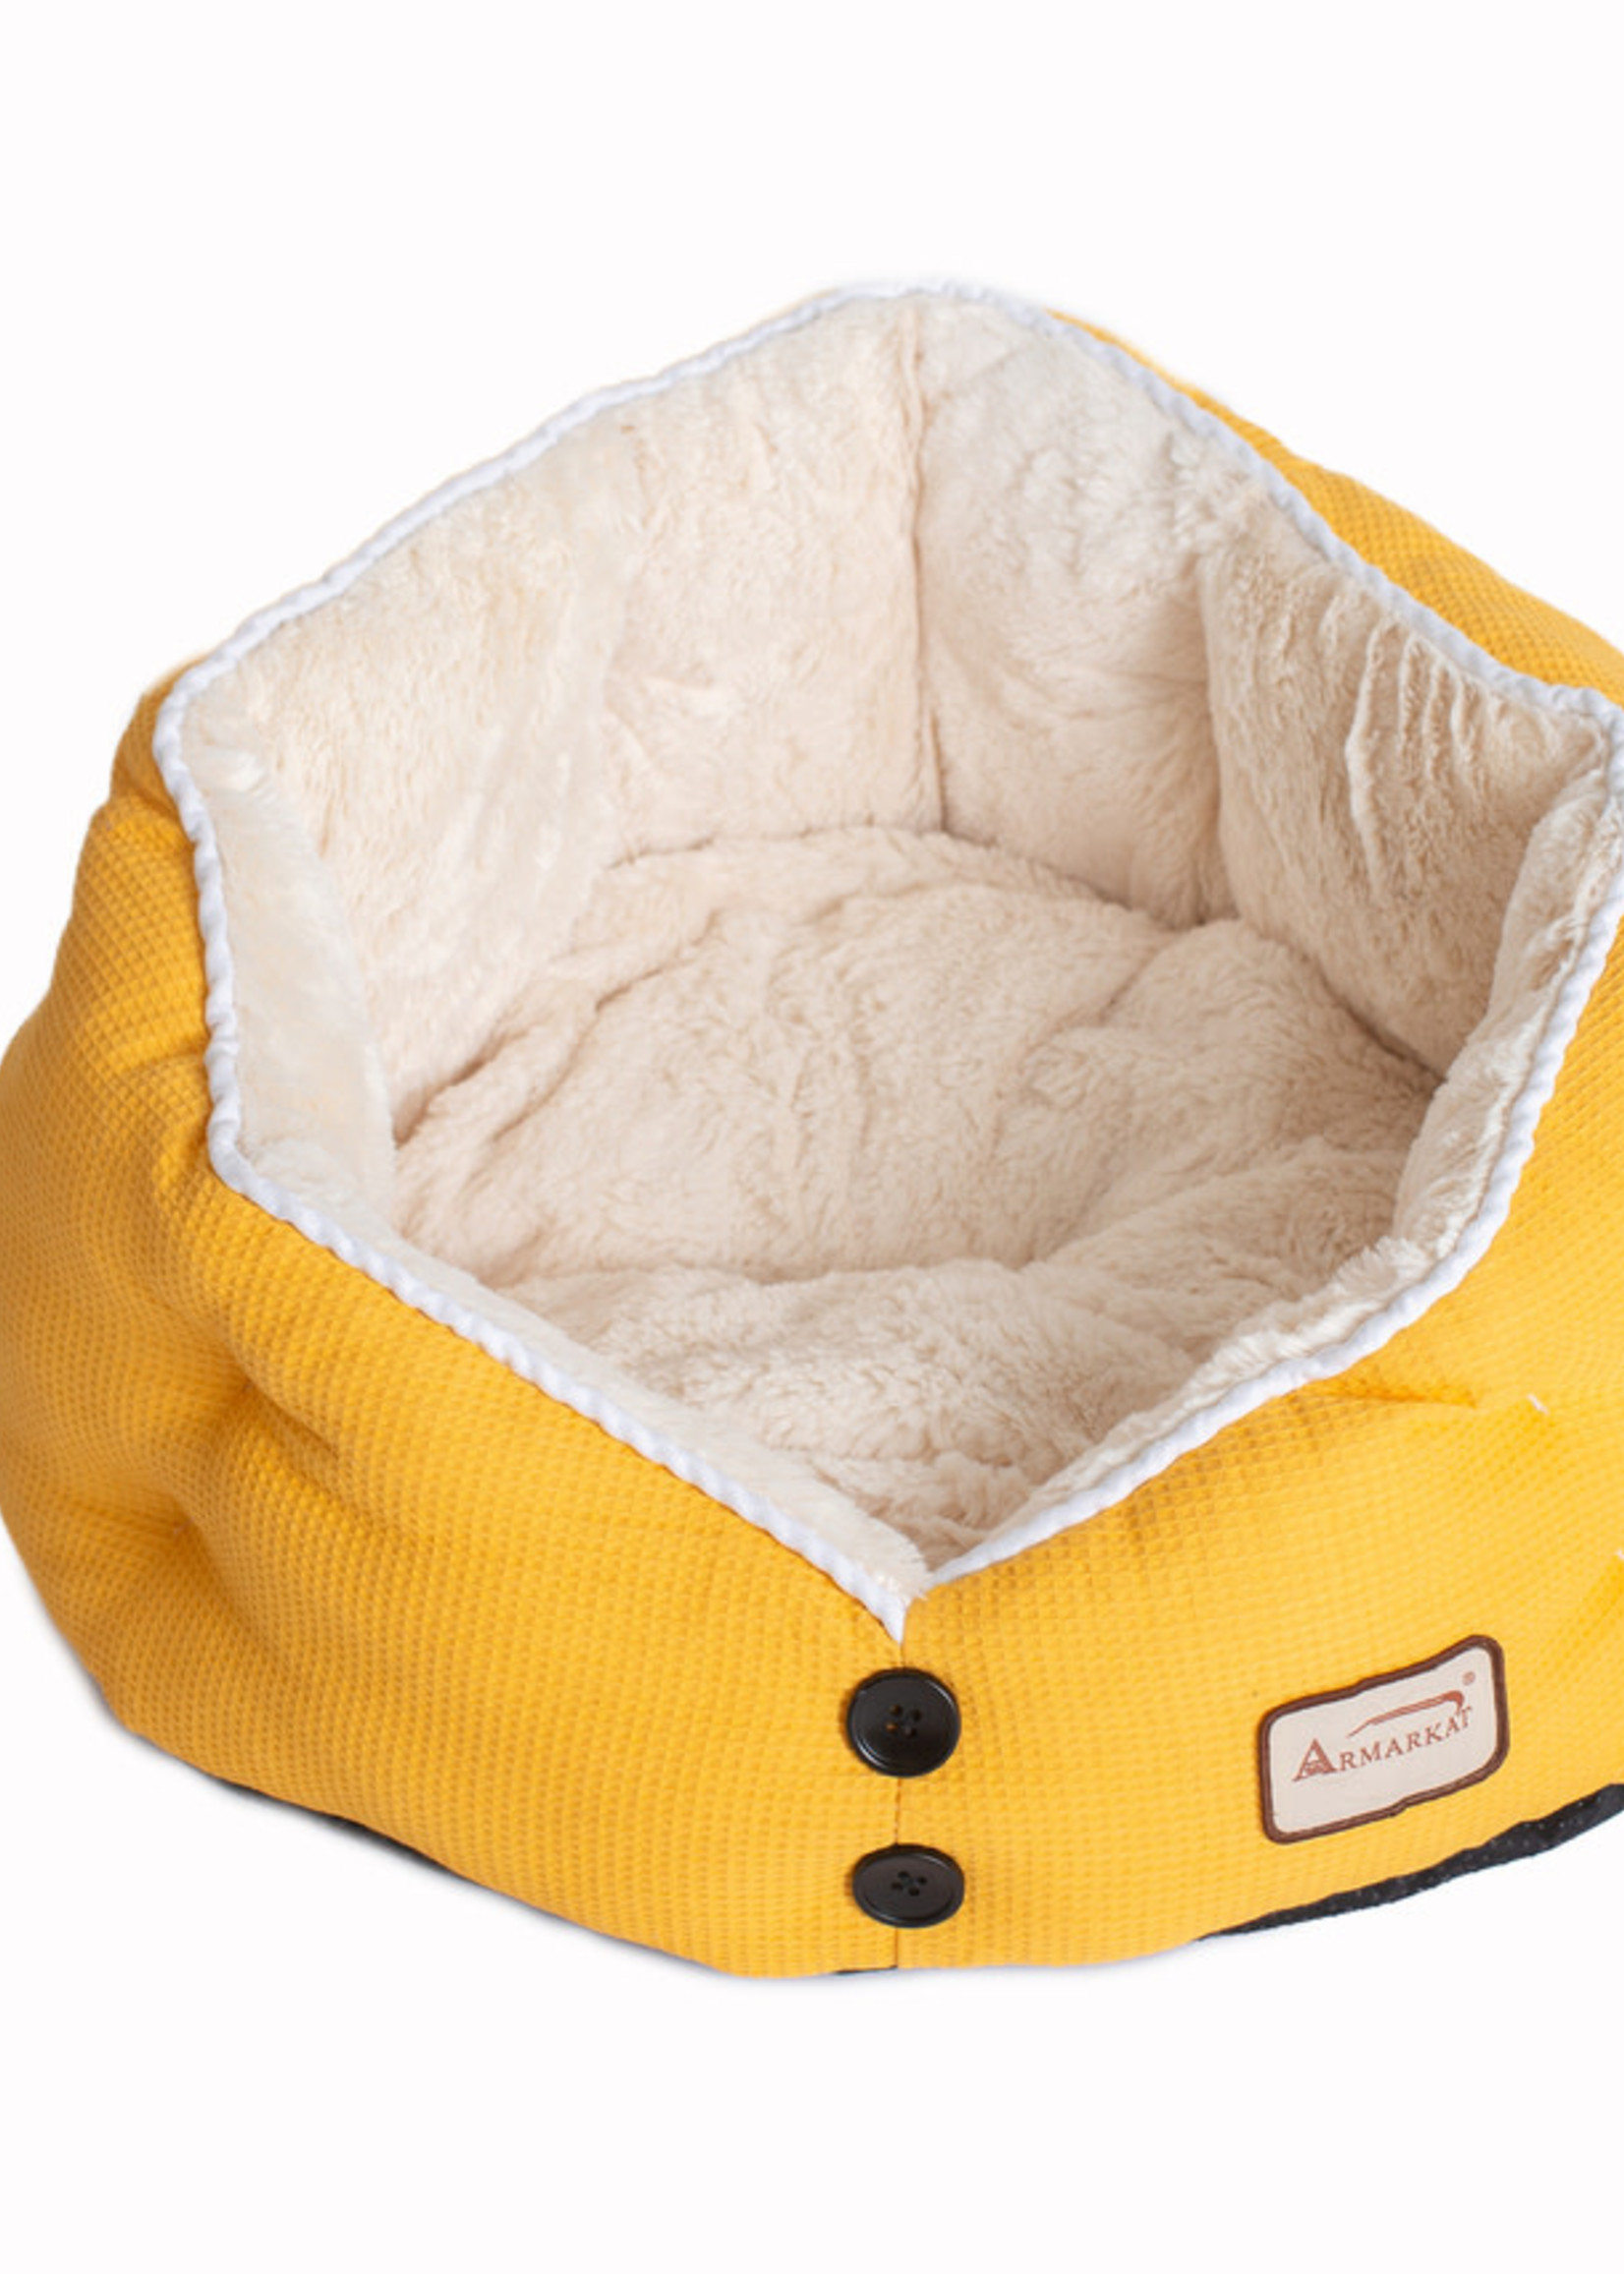 Armarkat Armarkat Cat Bed Gold Waffle and White